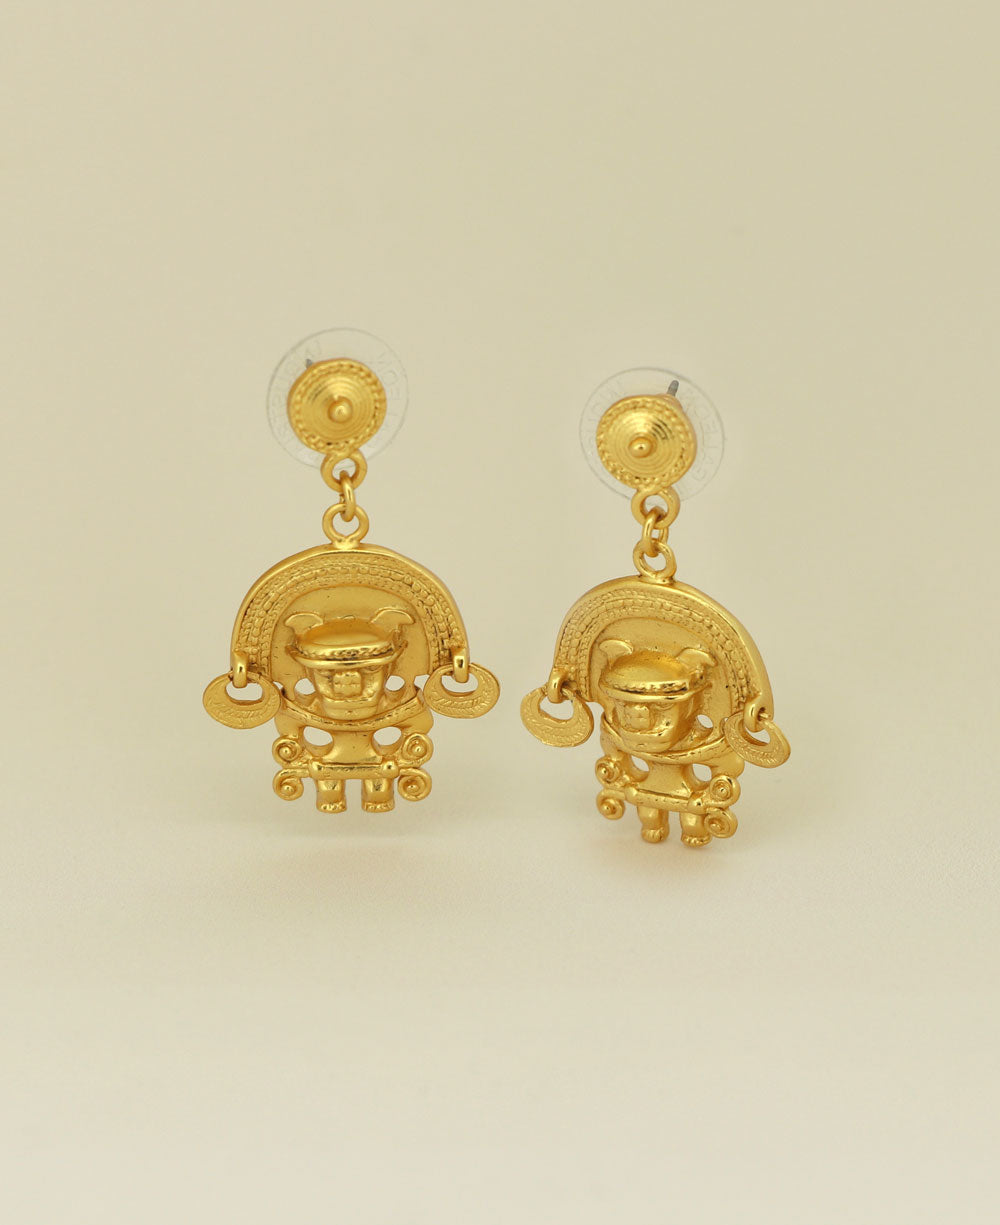 Close-up image of the Gold Plated Tairona Symbol Earrings highlighting the intricate design and glowing gold plating